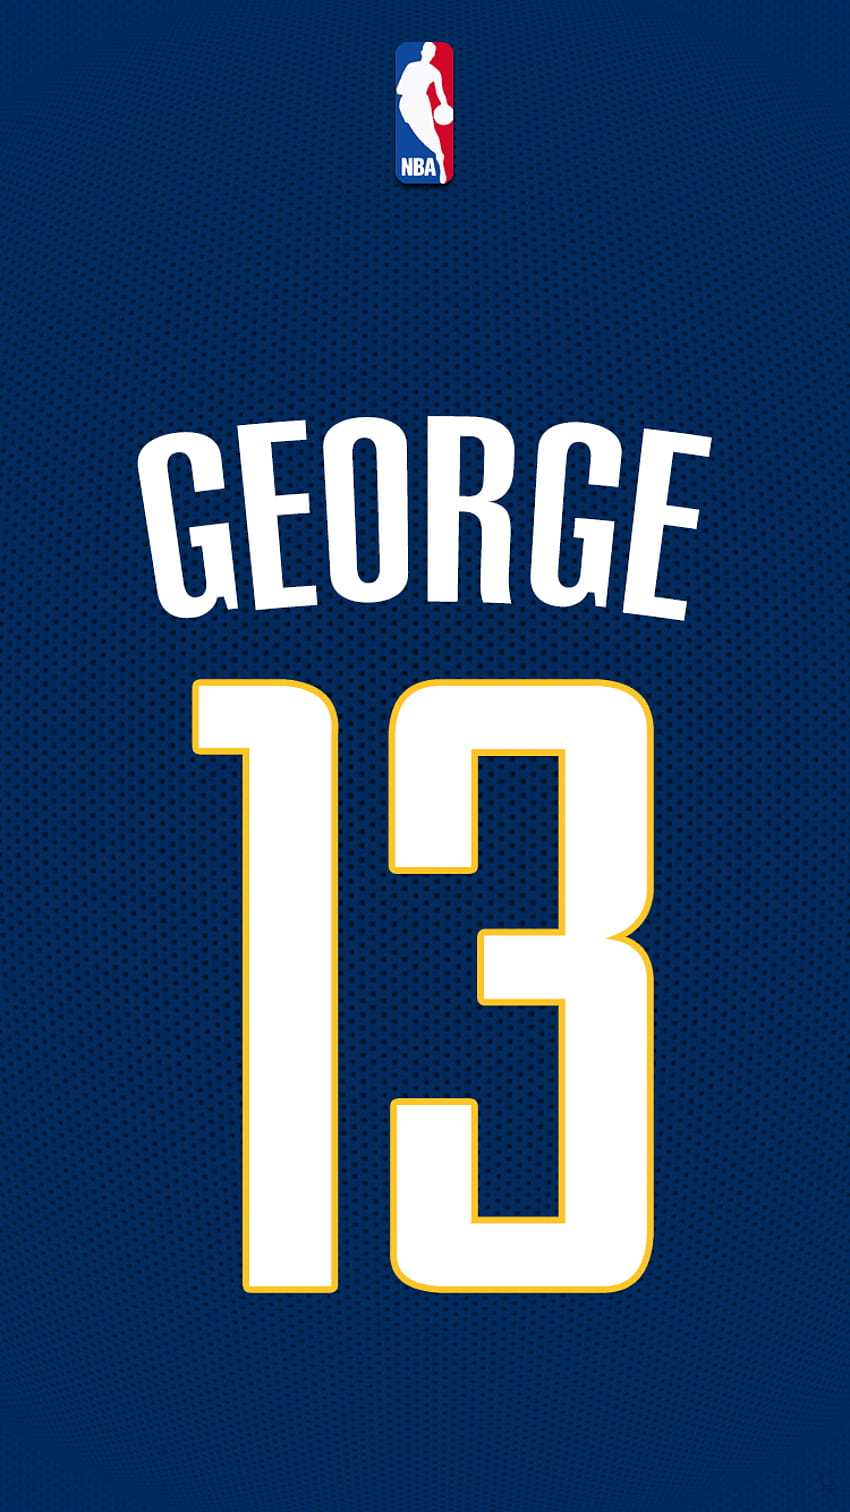 paul george iphone clippers HD phone wallpaper